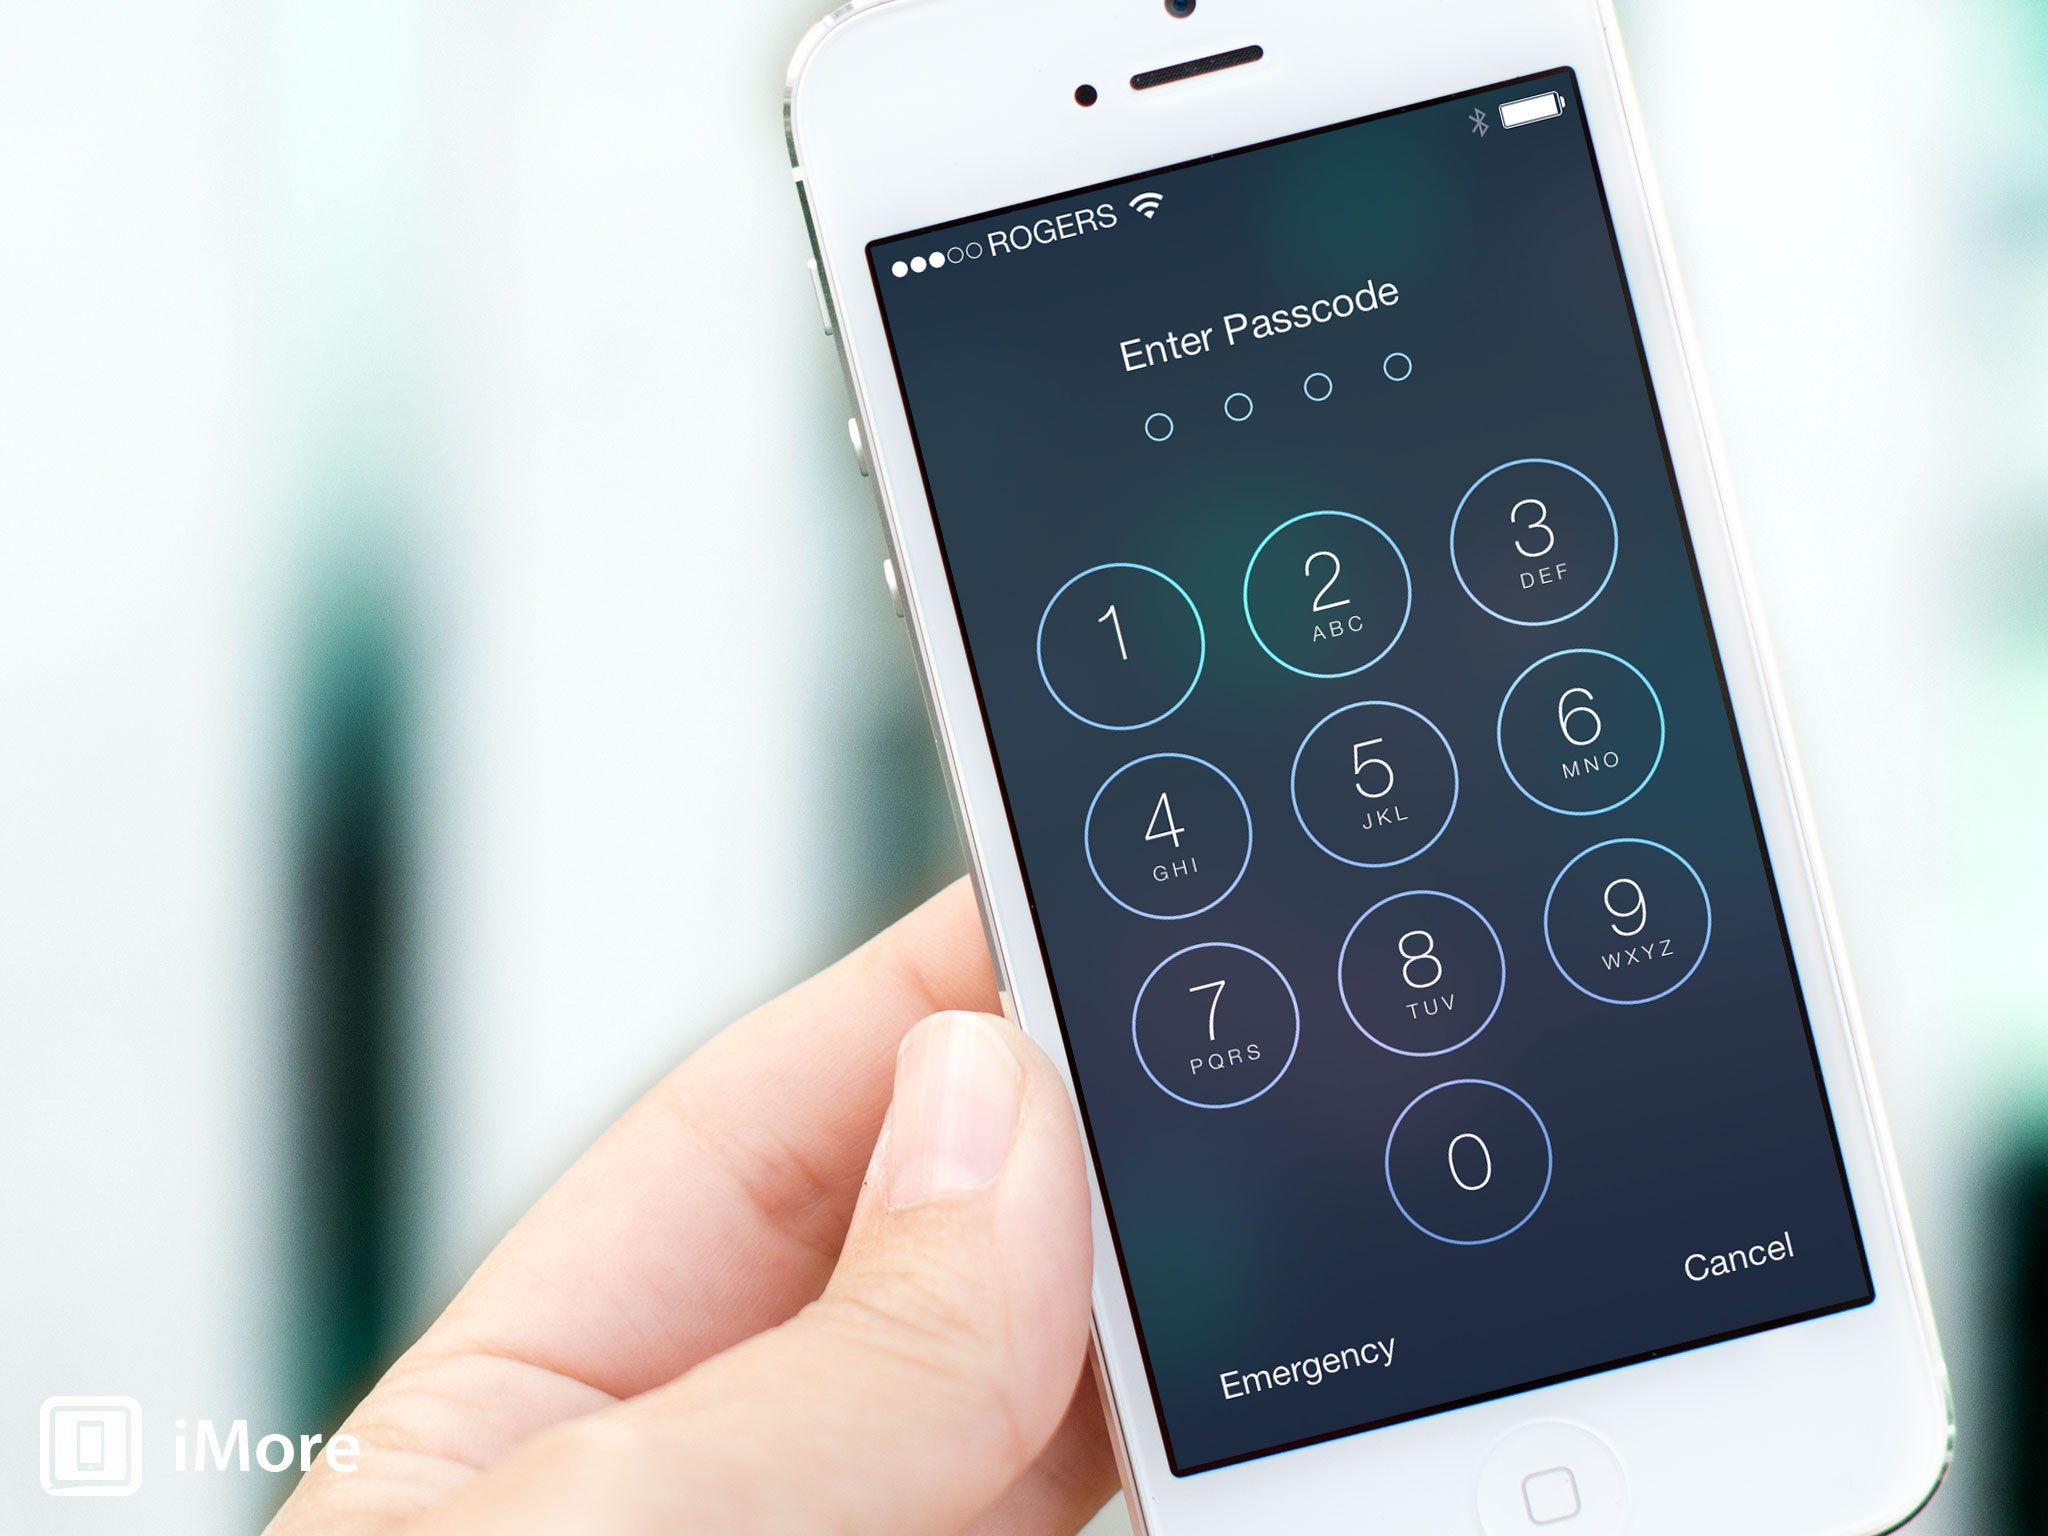 iOS 7 Security - The good, the bad, and the controversy